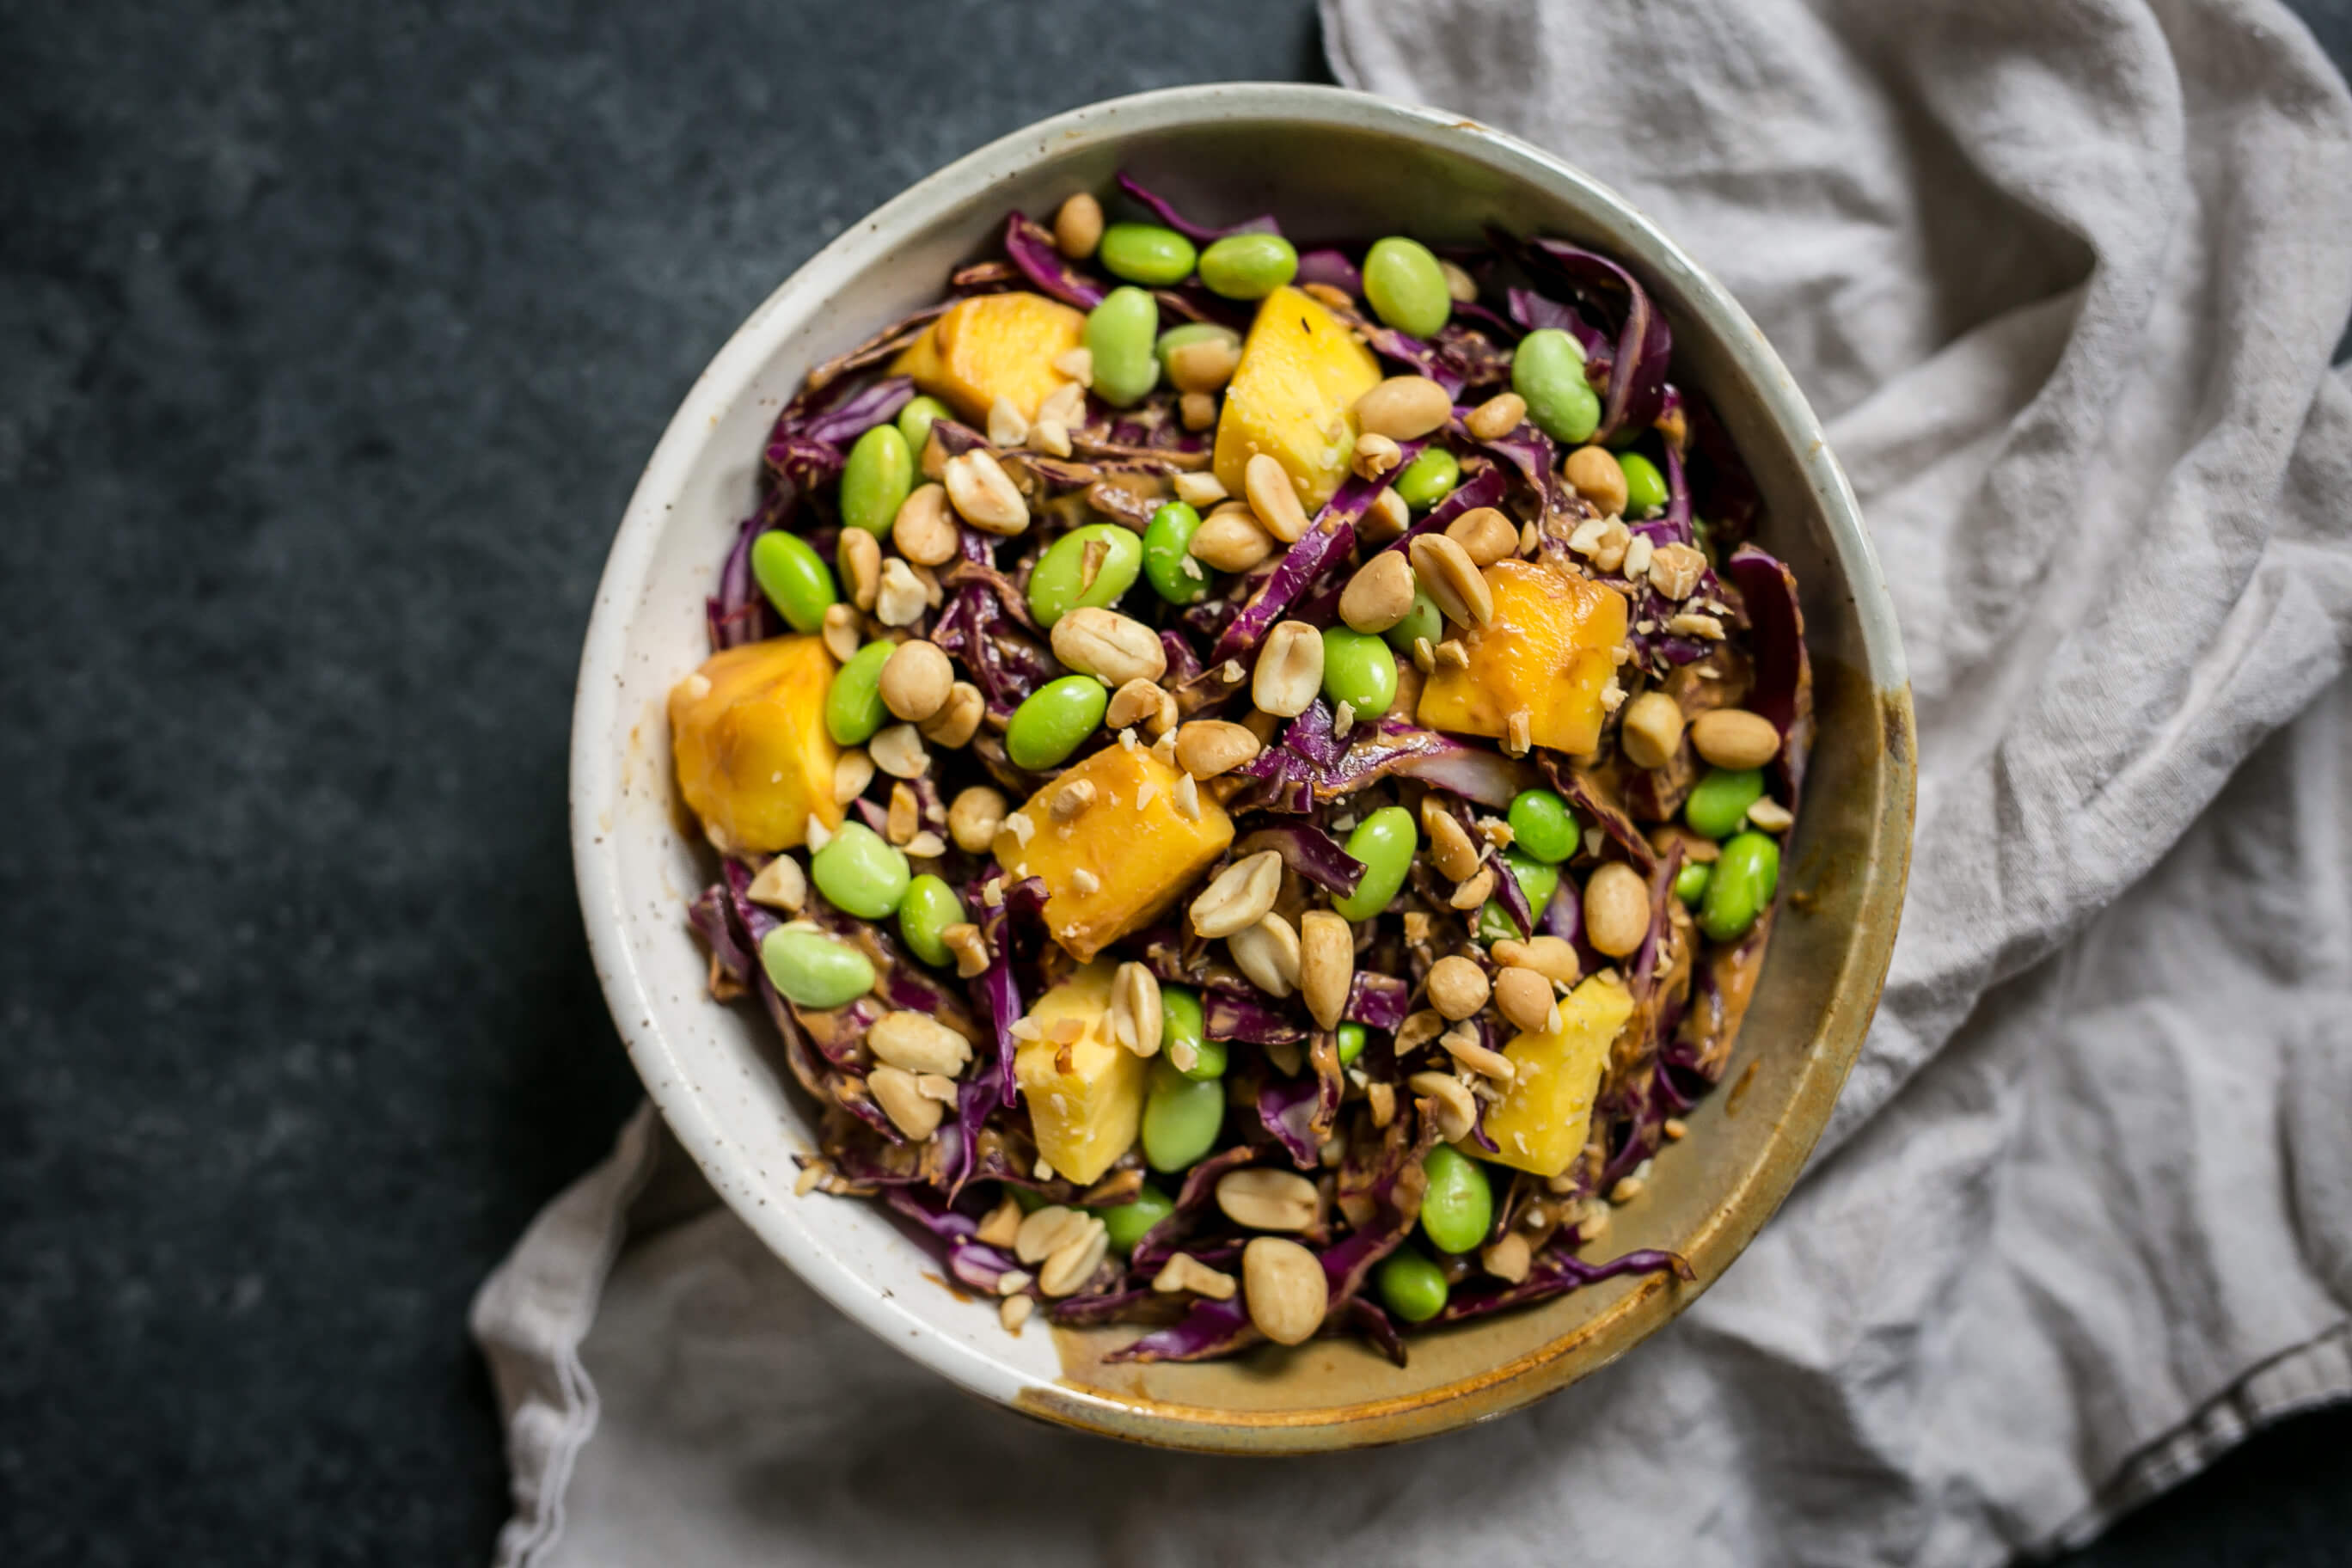 20 Healthy Meals to Help Your Clients Eat Healthy on a Tight Budget: Mango, Edamame & Cabbage Salad with Peanut Sauce